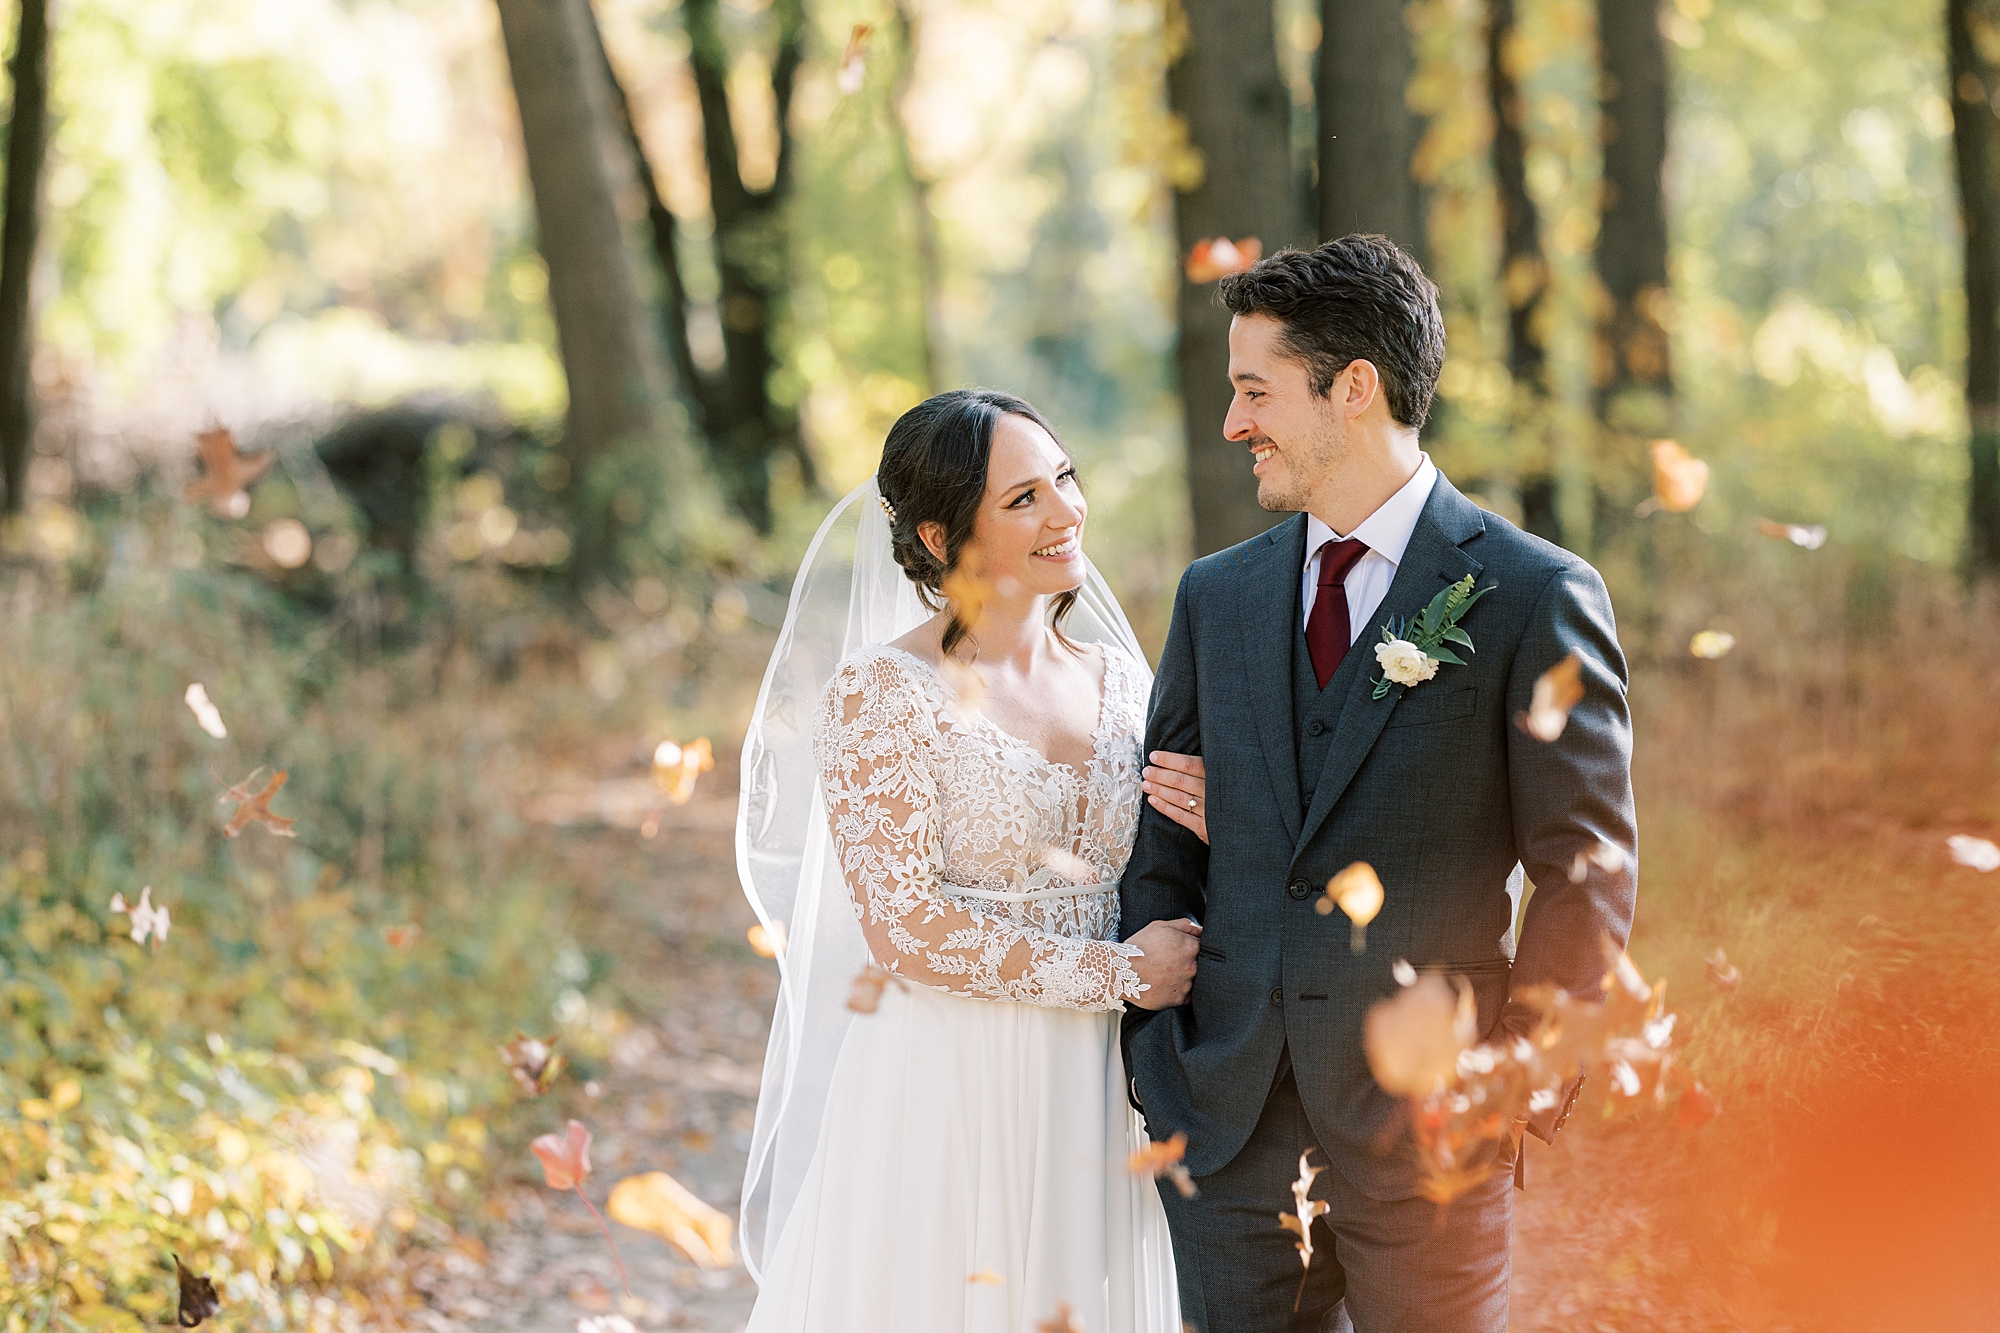 bride smiles up at groom holding his arm during portraits among trees at Huntingdon Valley Country Club